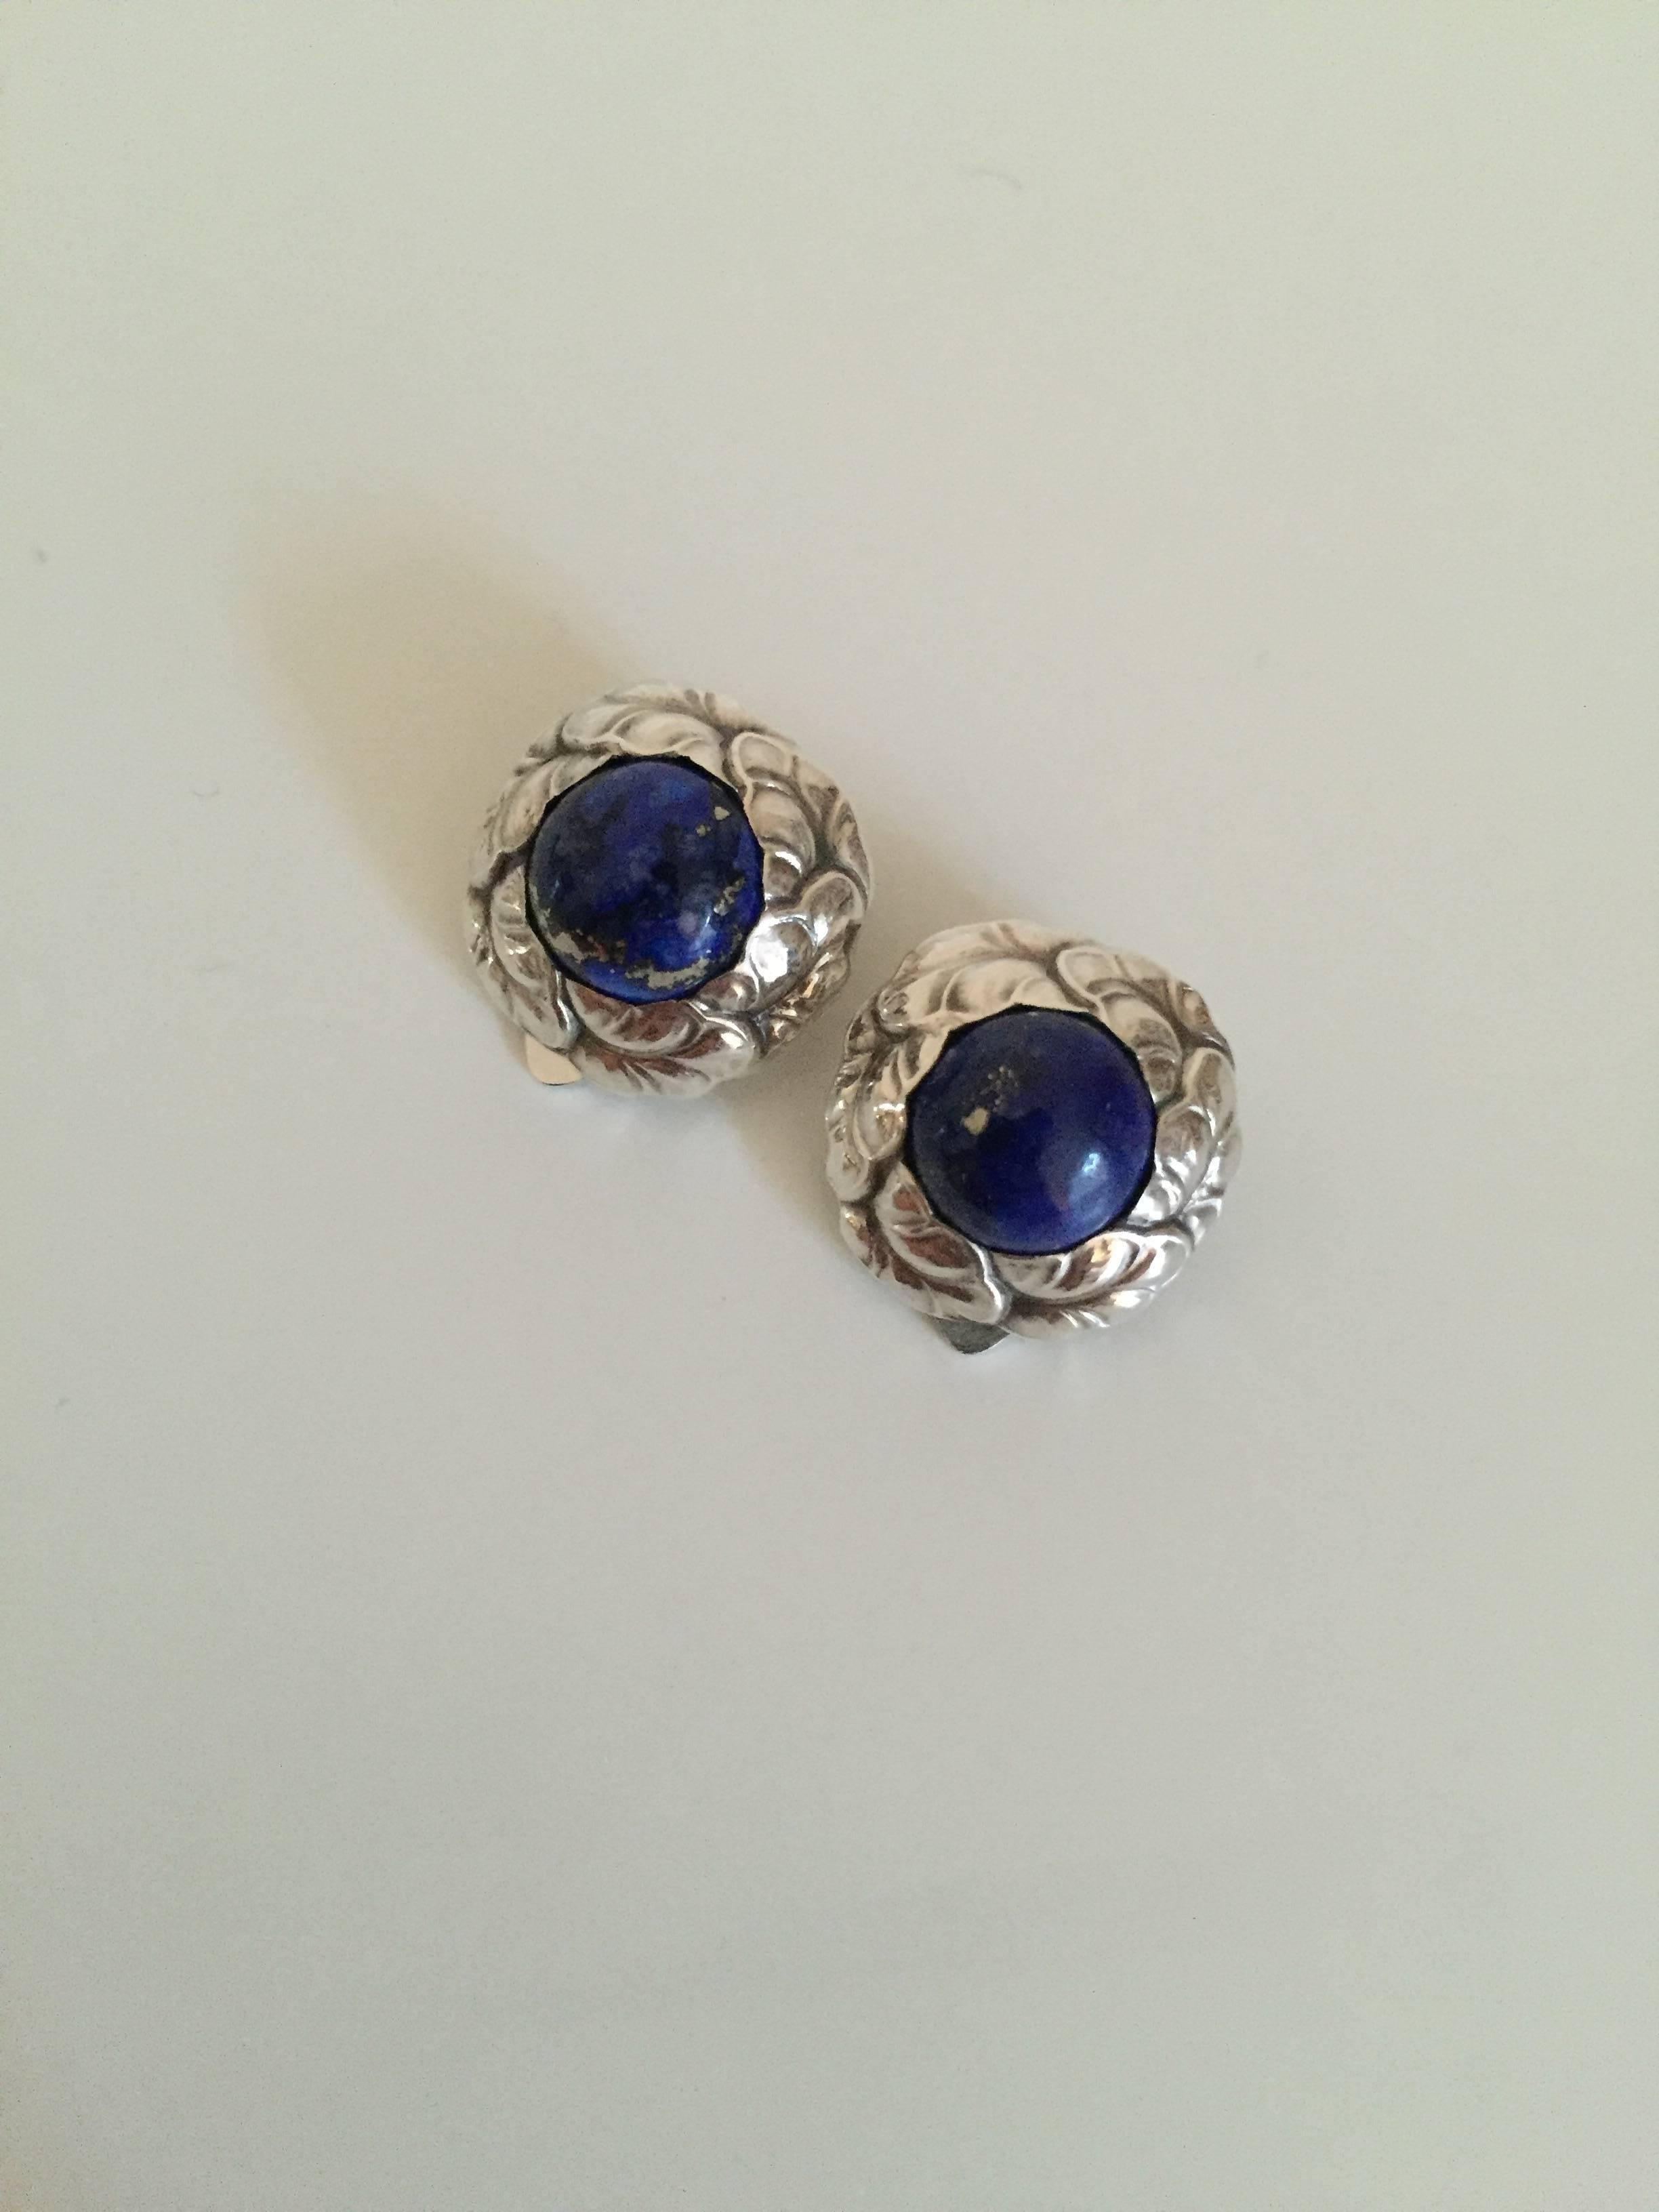 20th Century Georg Jensen Sterling Silver Earclips #74 with Lapis Lazuli